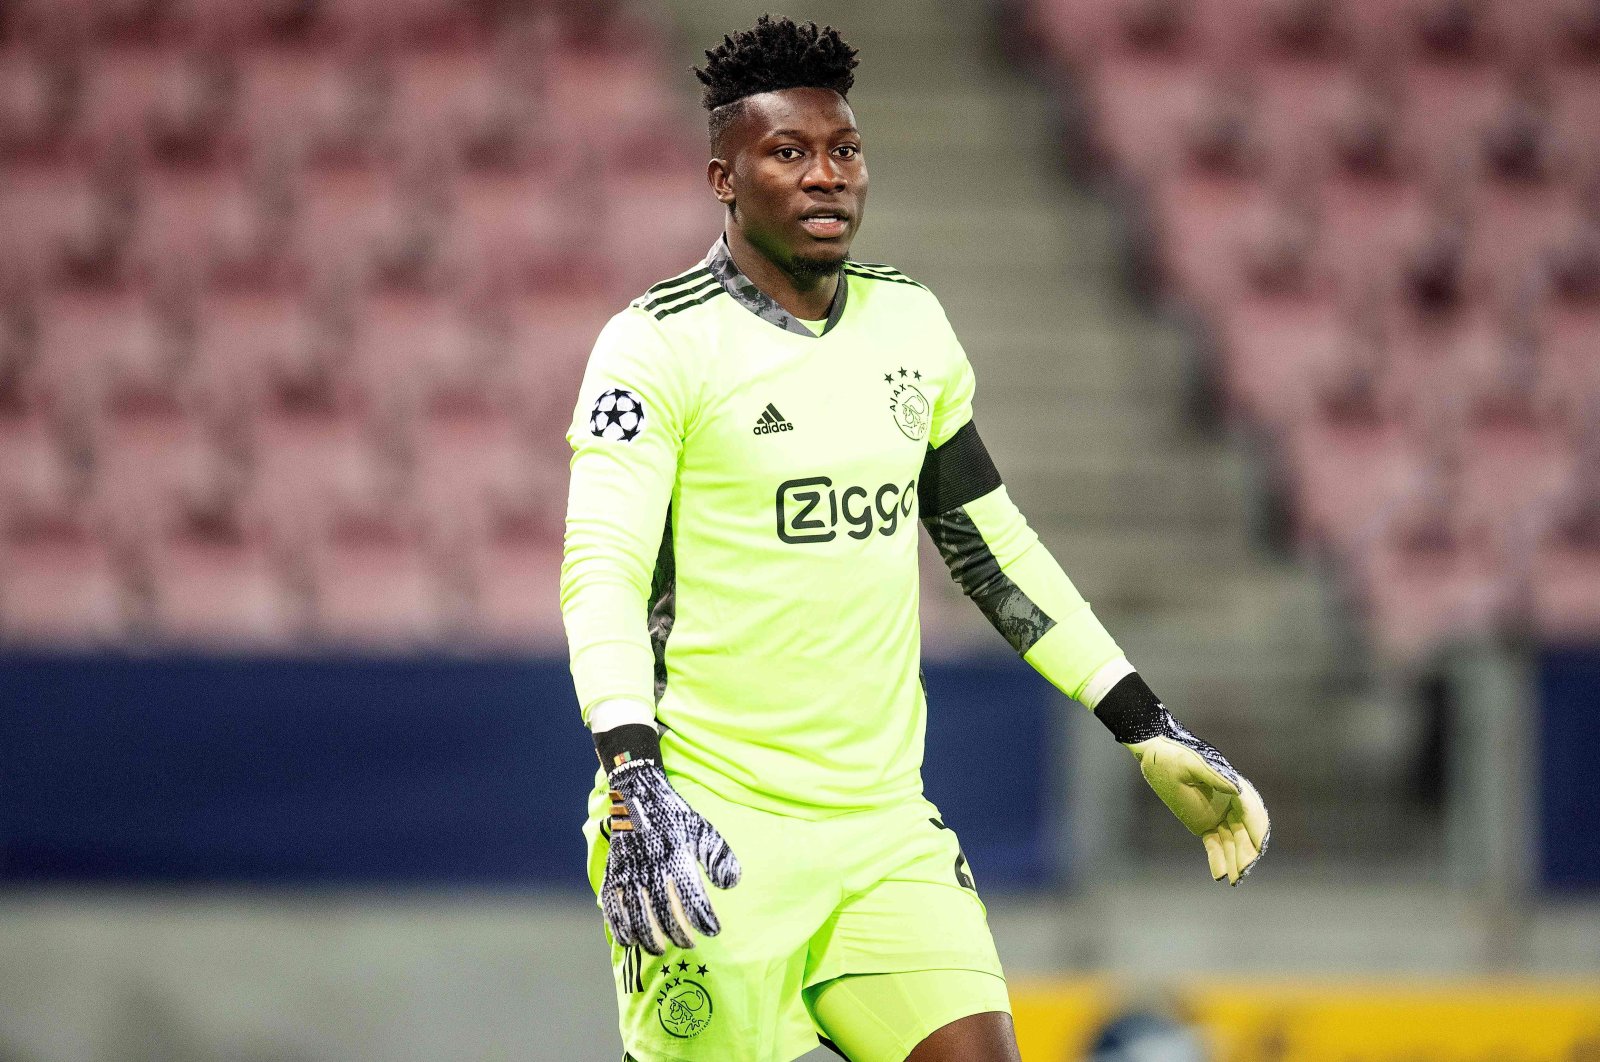 Ajax's Cameroon goalkeeper Andre Onana looks on during the UEFA Champions League match against FC Midtjylland at MCH Arena, Herning, Denmark, Nov. 3, 2020. (AFP Photo)